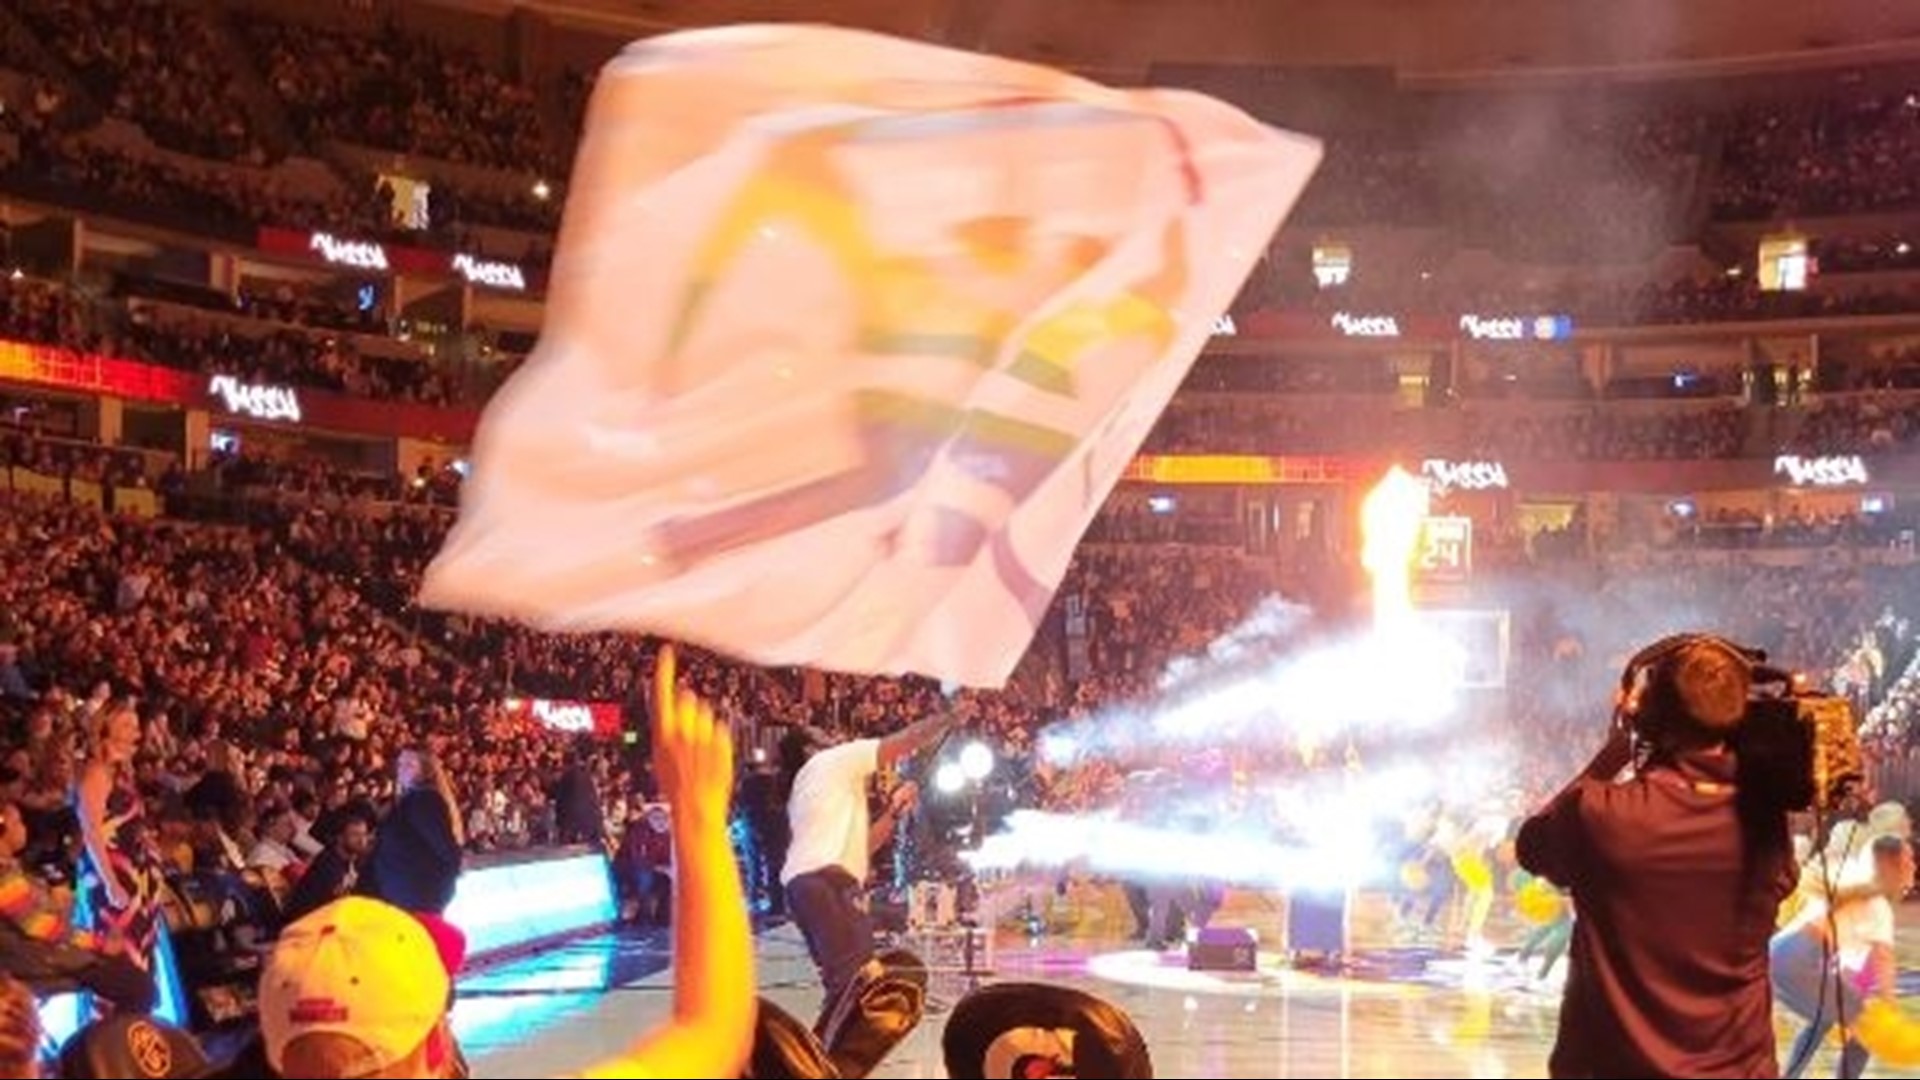 You Can Play and the Denver Nuggets teamed up to host their annual Pride Night, which helped bring together the LGBTQ community and allies.